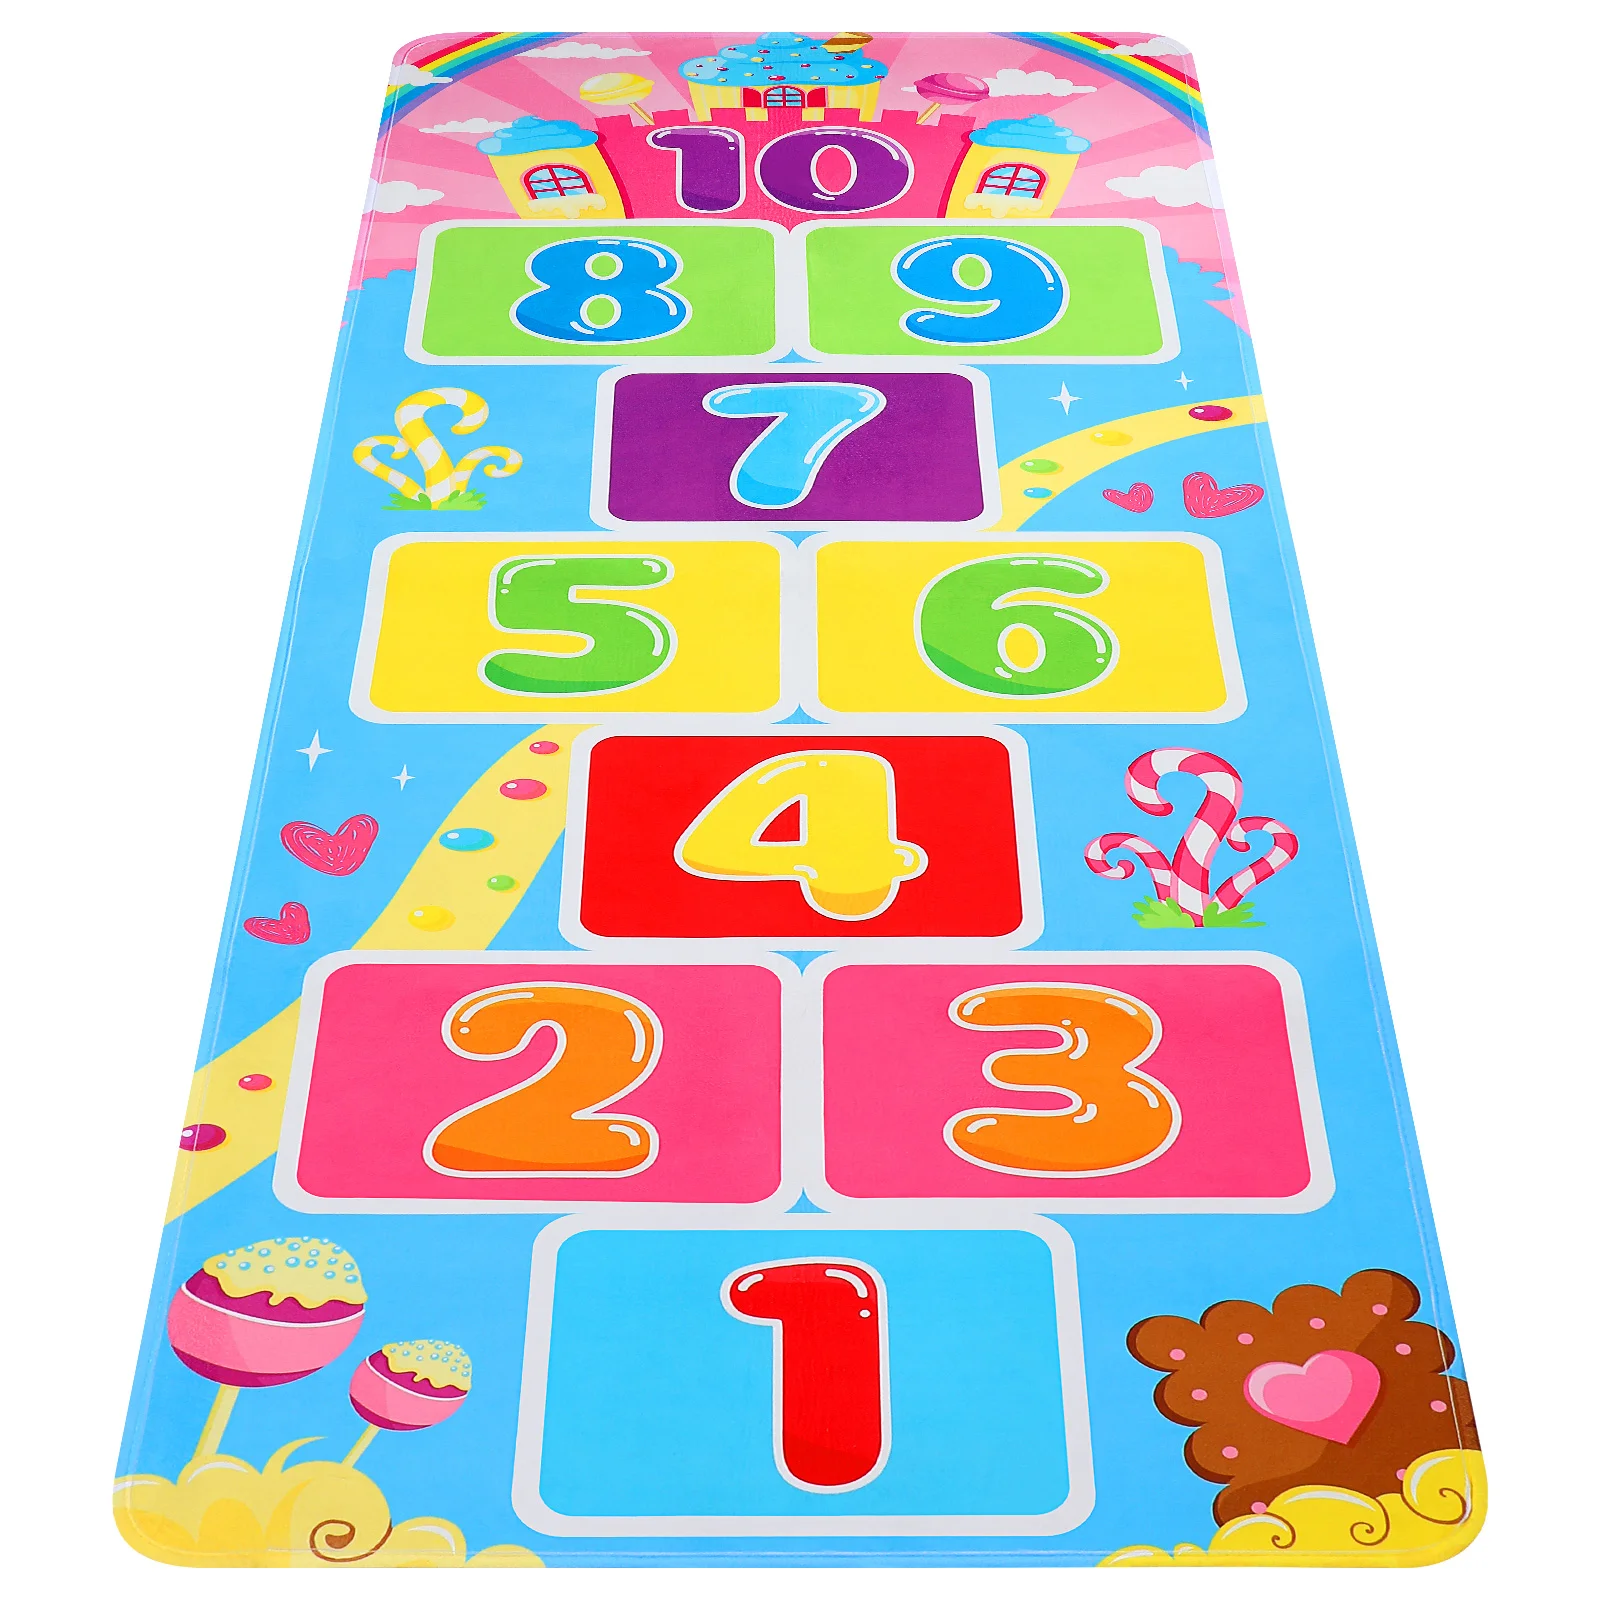 

IMIKEYA 1Pc Hopscotch Rug Kids Playroom Childrens Carpet Non-slip Classroom Activity Rugs For Kids for Boys Girls Shower Gift